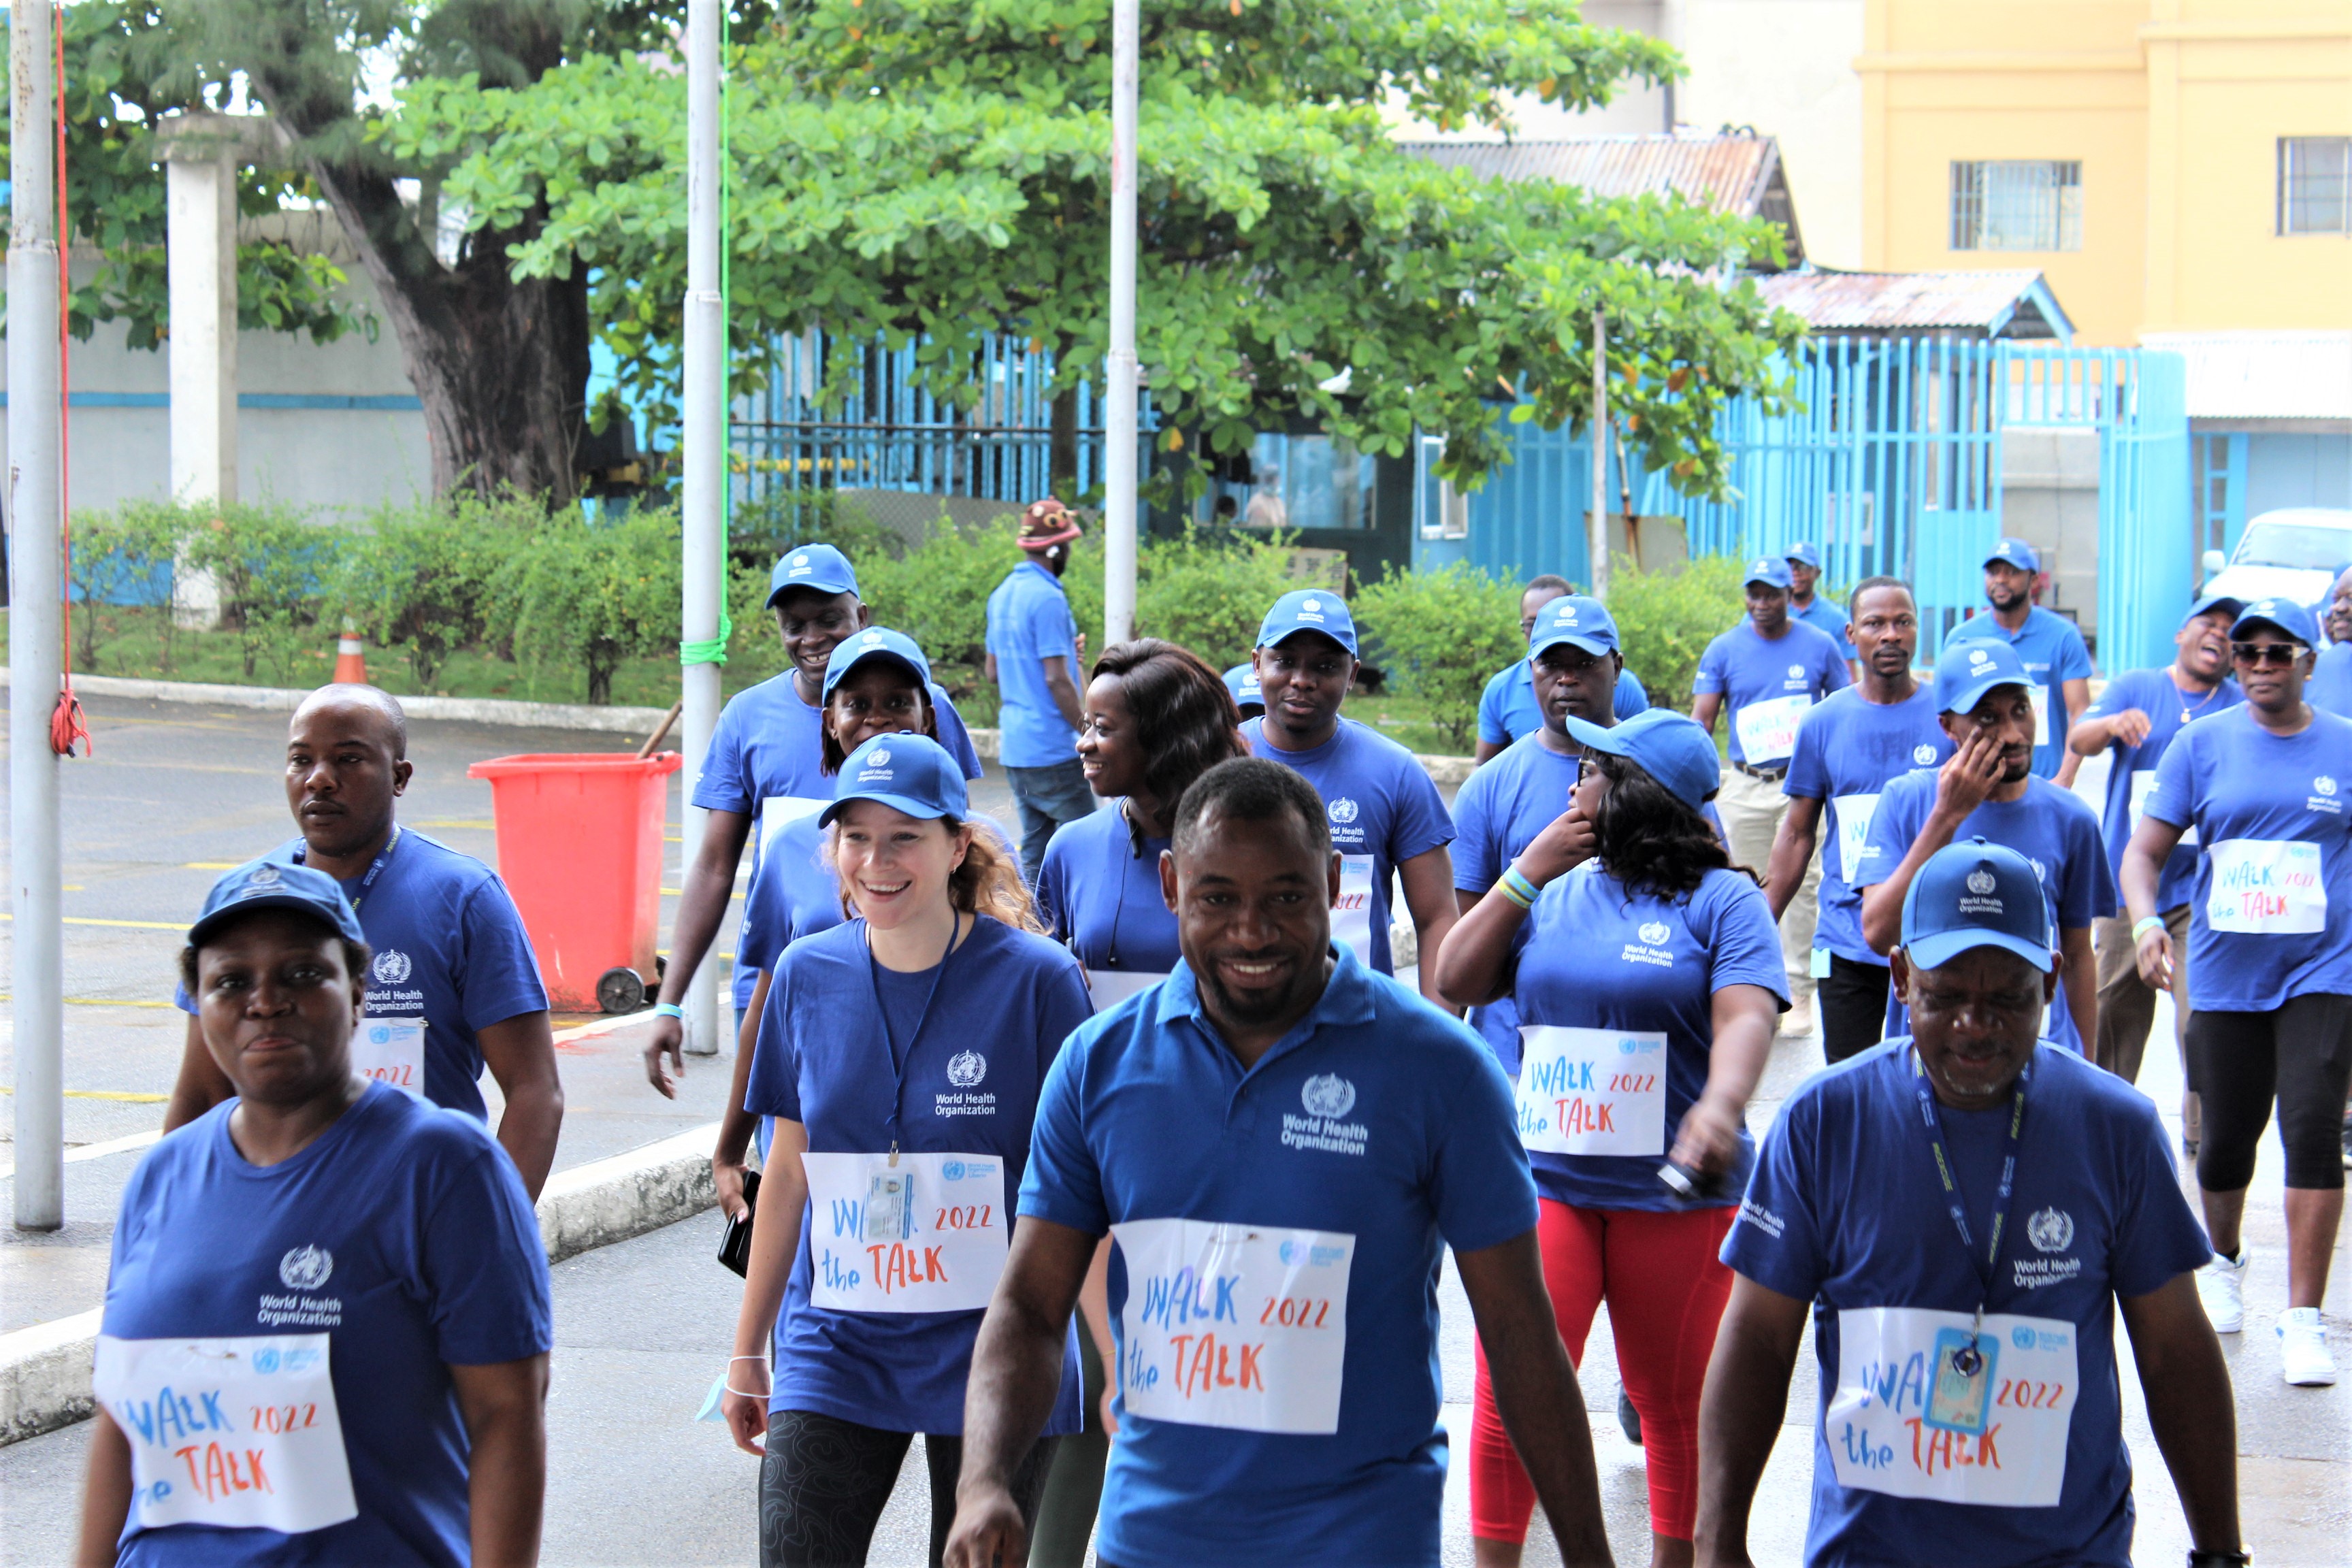 WHO Liberia staff walking the talk through their participation in the 4km walk